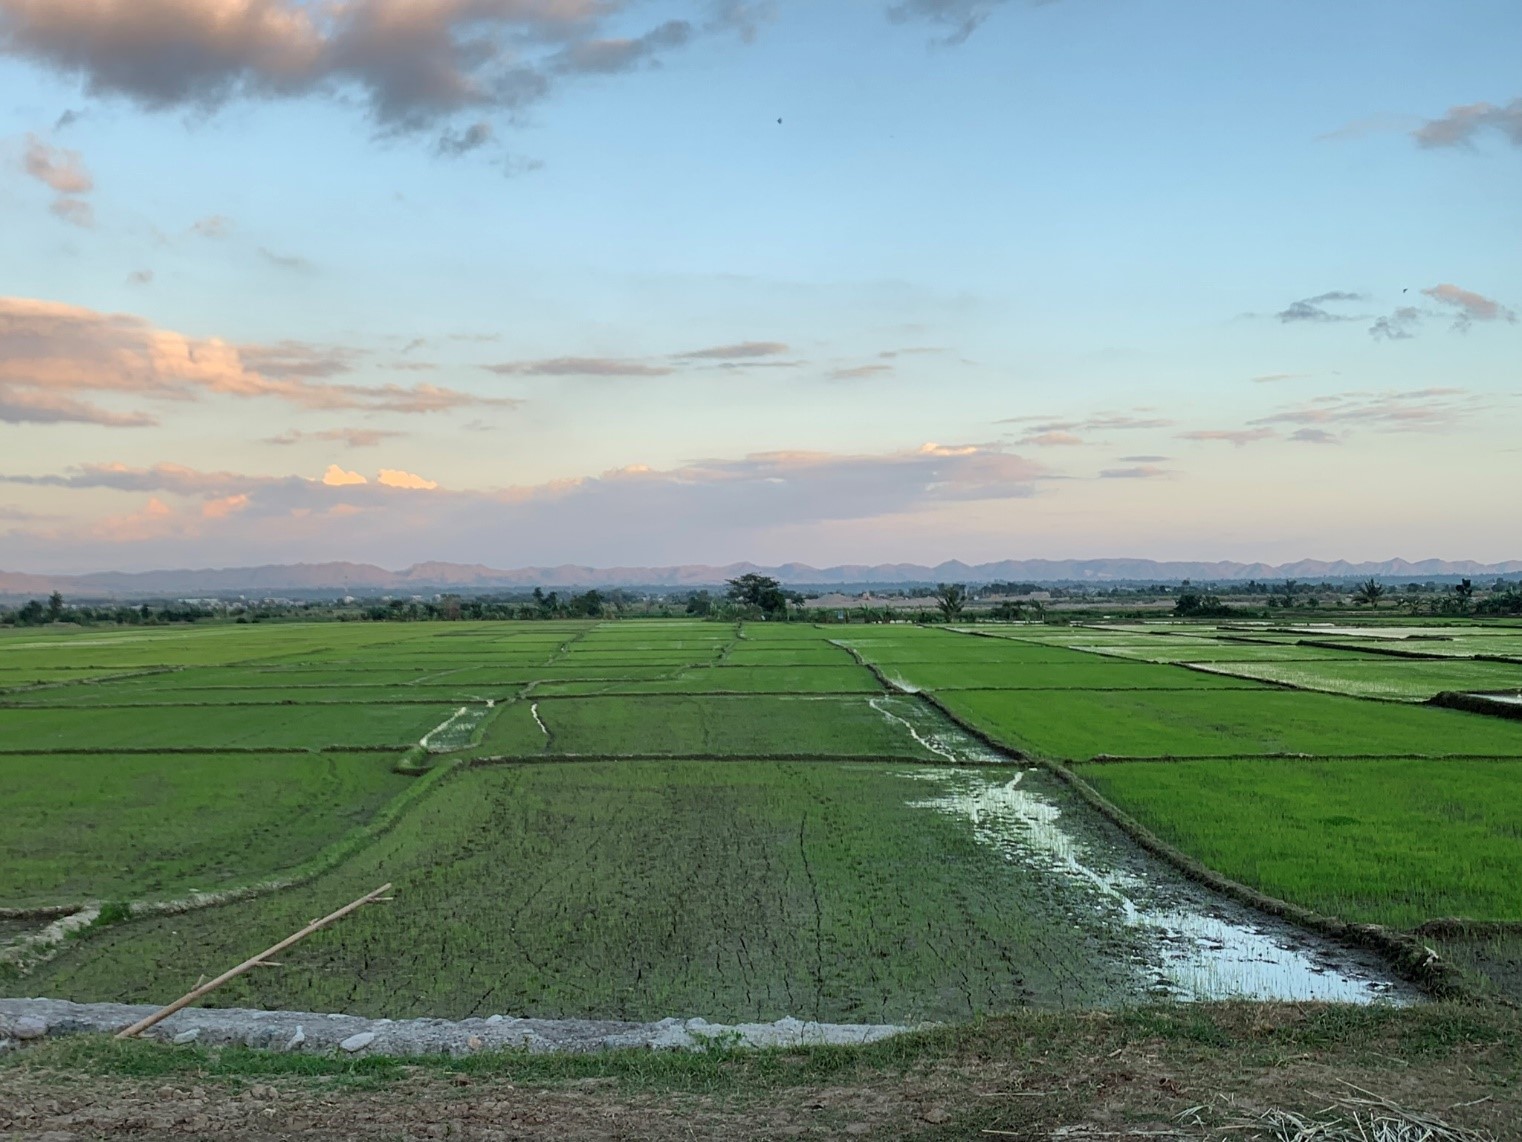 Agricultural landscape in Kalinga, Philippines. Photo credit: Marcel Gatto/CIP